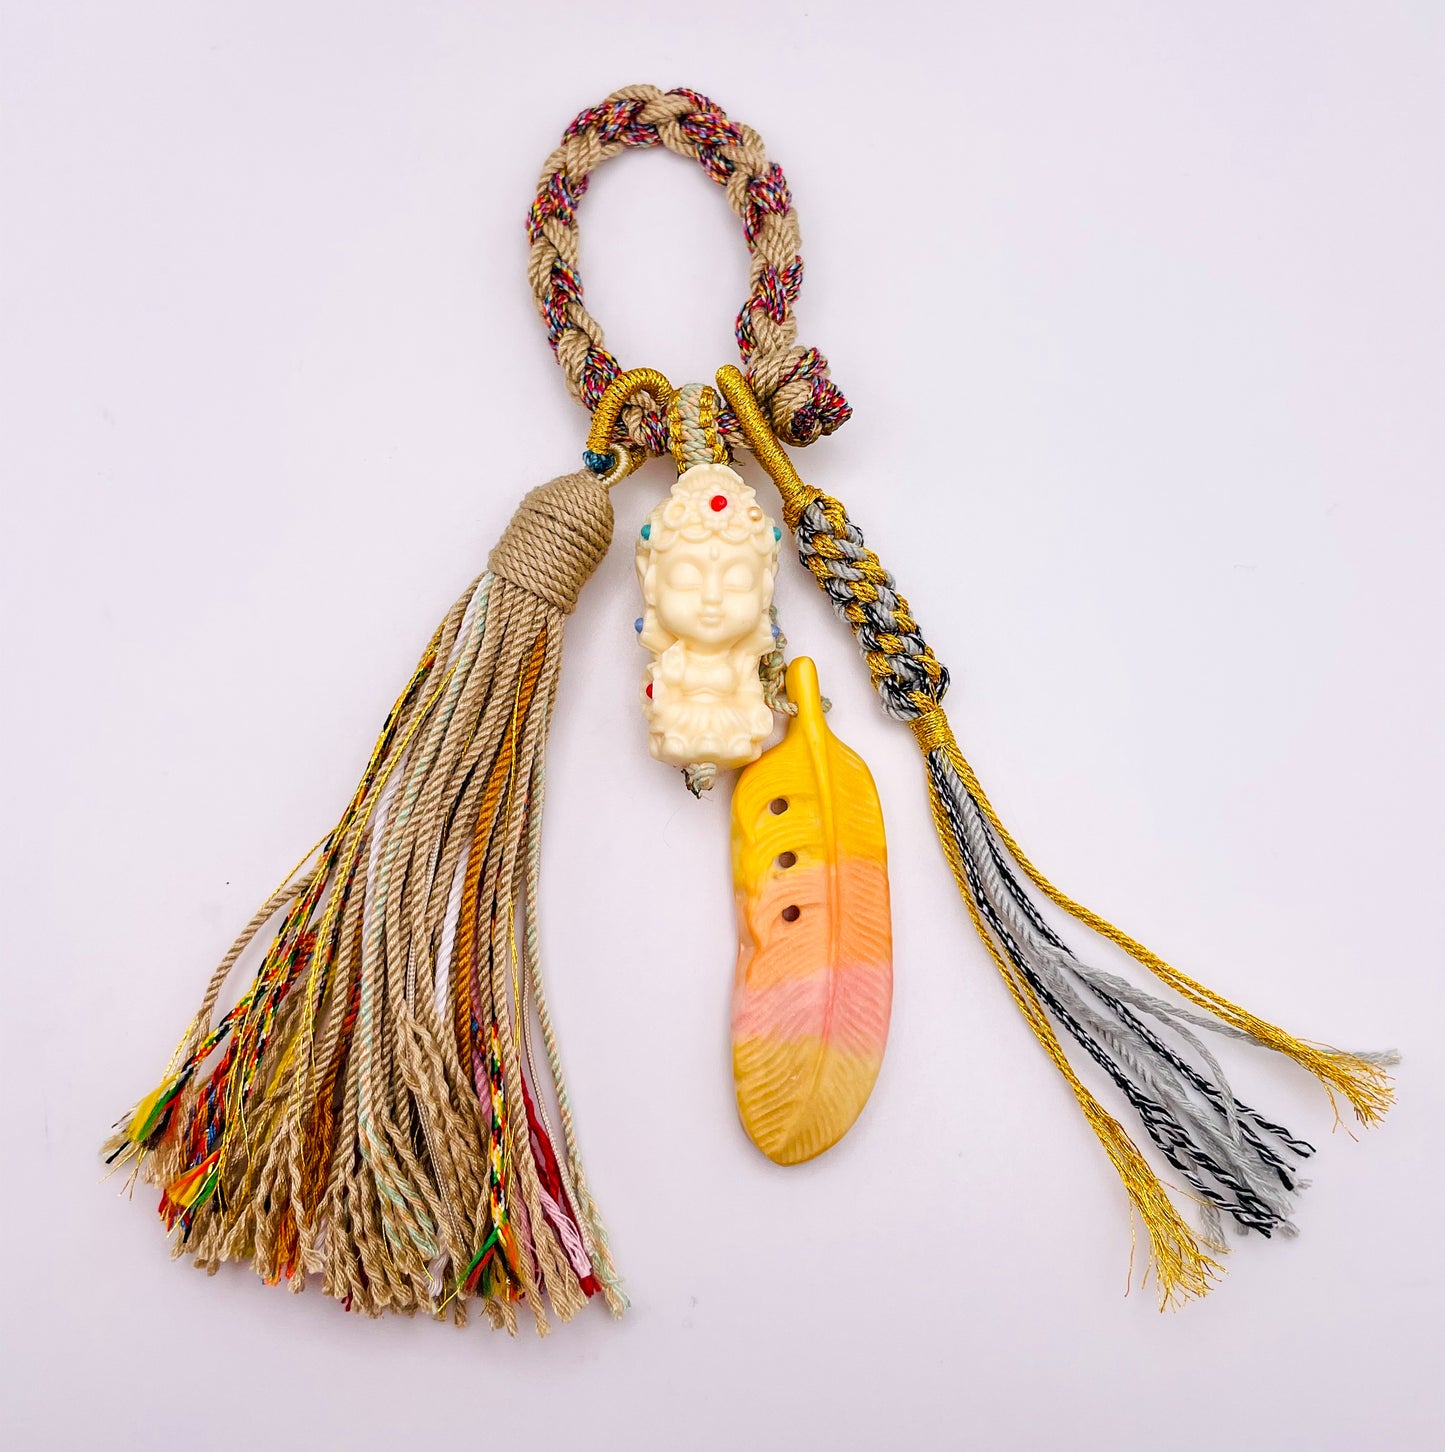 Ivory Nut Budda Carving with Feather on Handmade Tassel Keychain